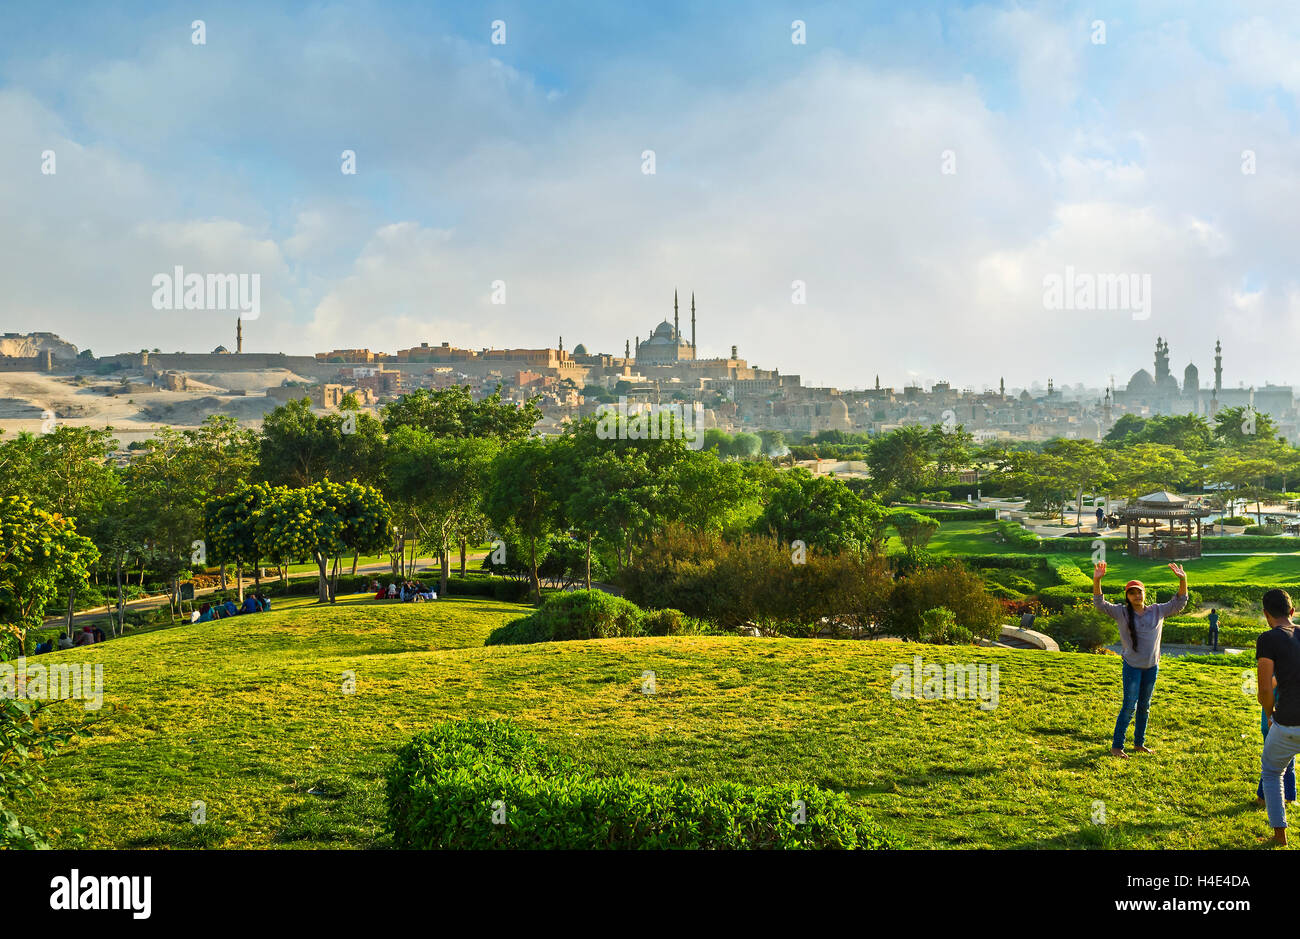 The Al-Azhar Park is the best place to relax and enjoy the fresh air, overlooking the main landmarks of Cairo from its hills Stock Photo